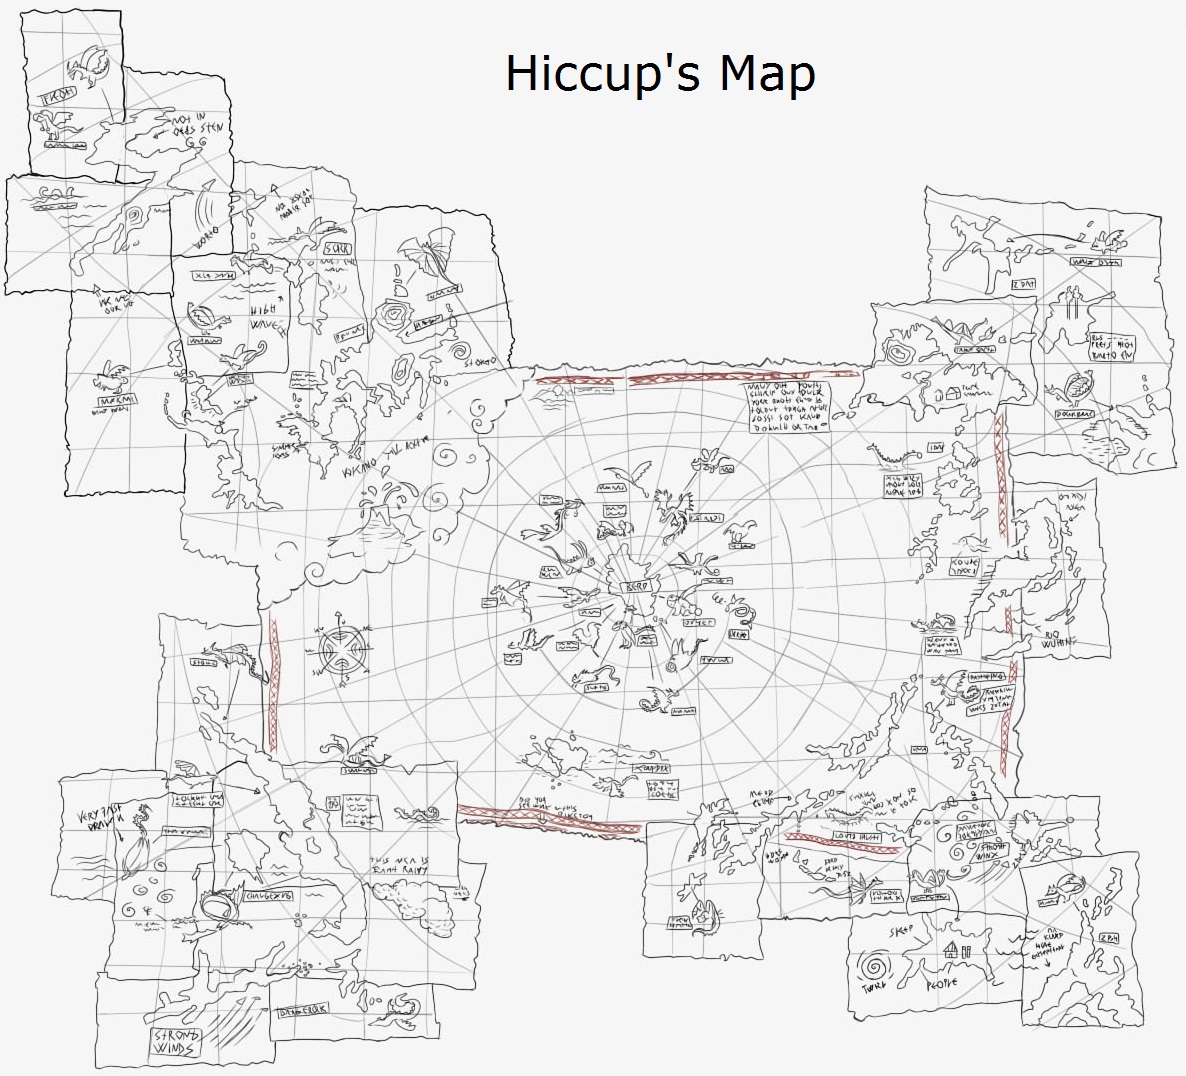 Sketch of Hiccup's Map